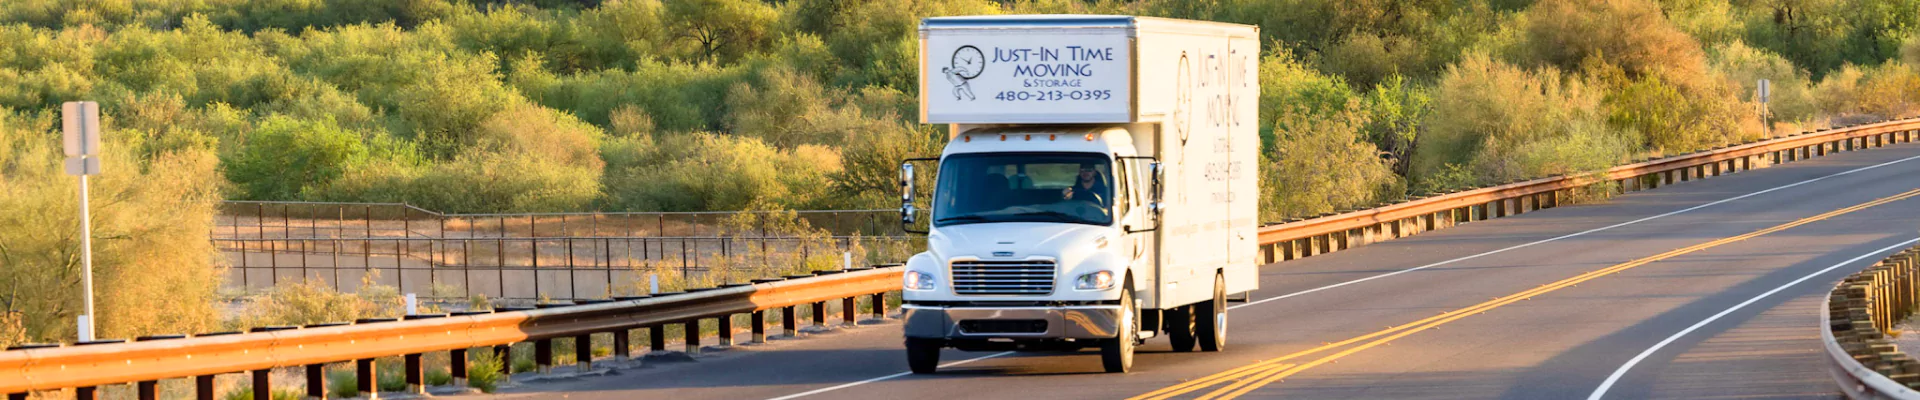 Moving Services - Just-in Time Moving and Storage